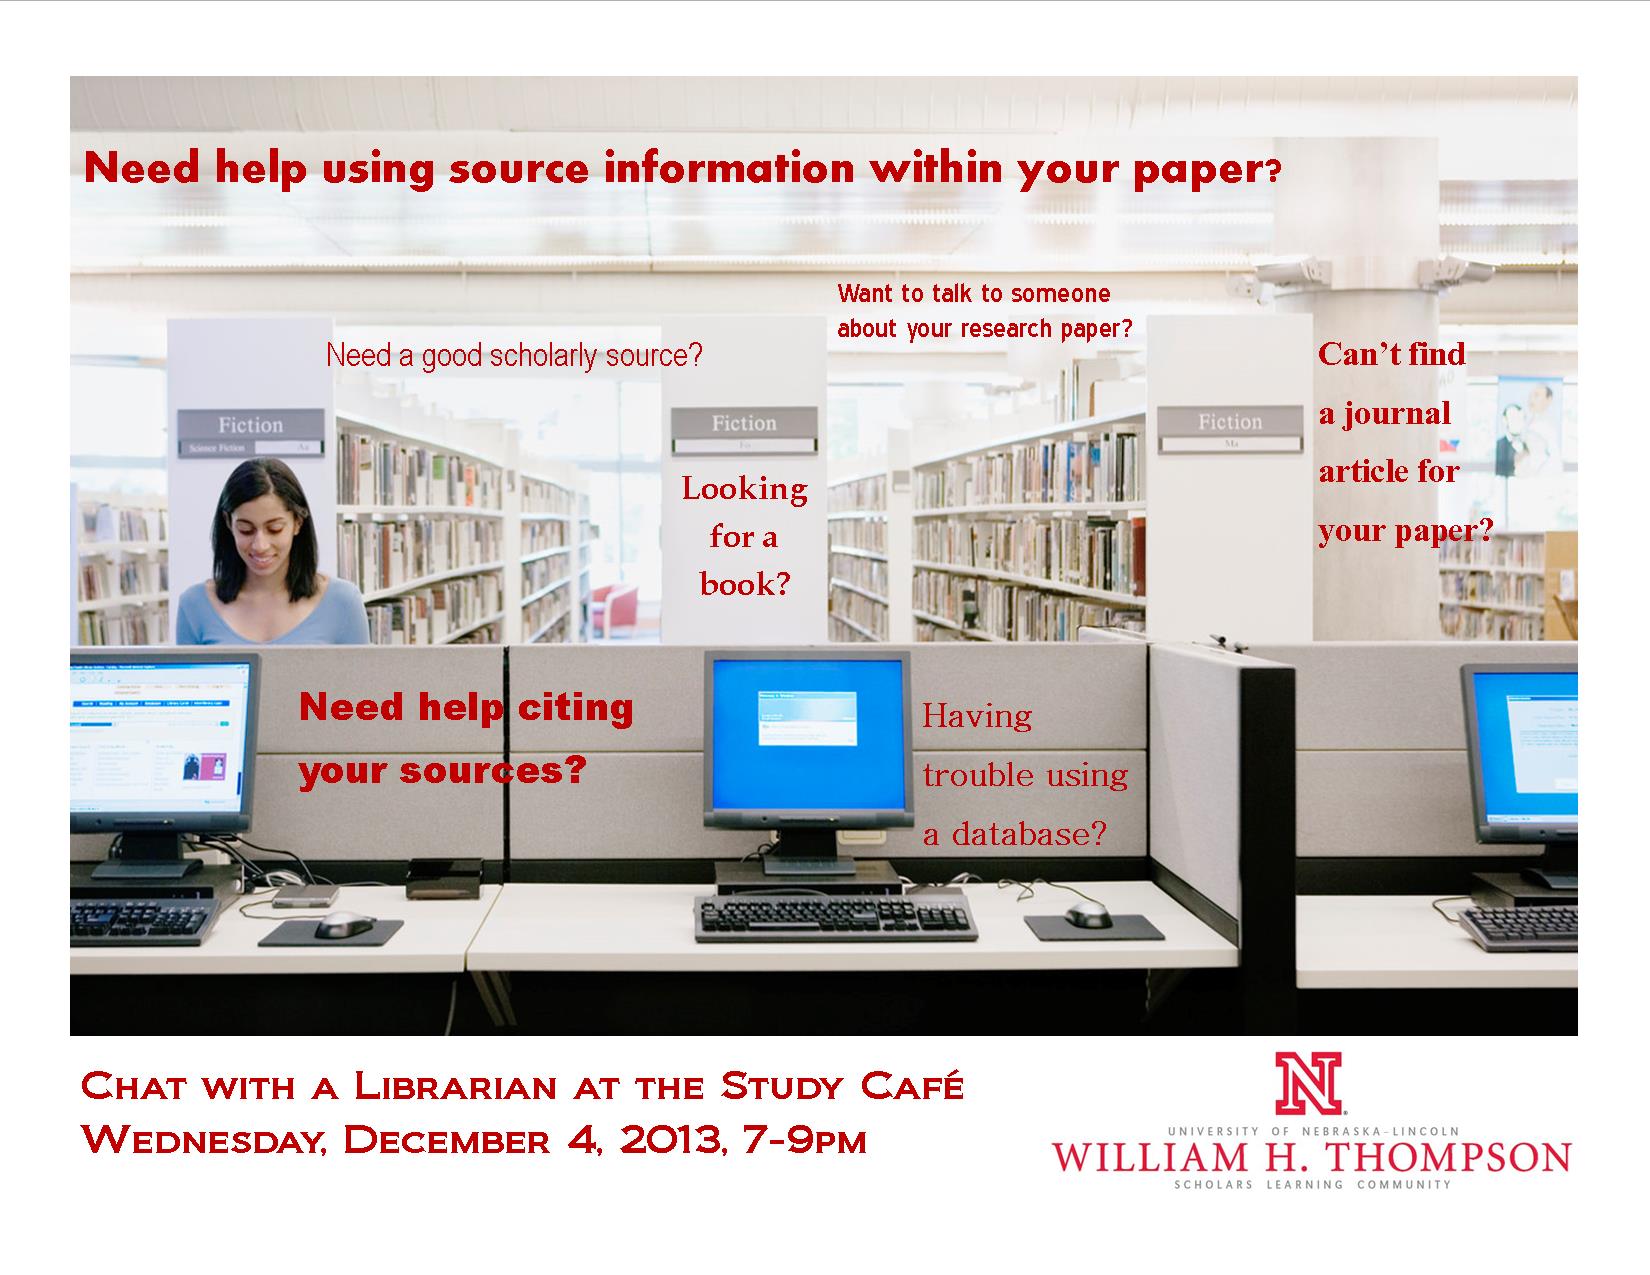 Chat with a Librarian at the Study Cafe: Wednesday, December 4 from 7-9 p.m.